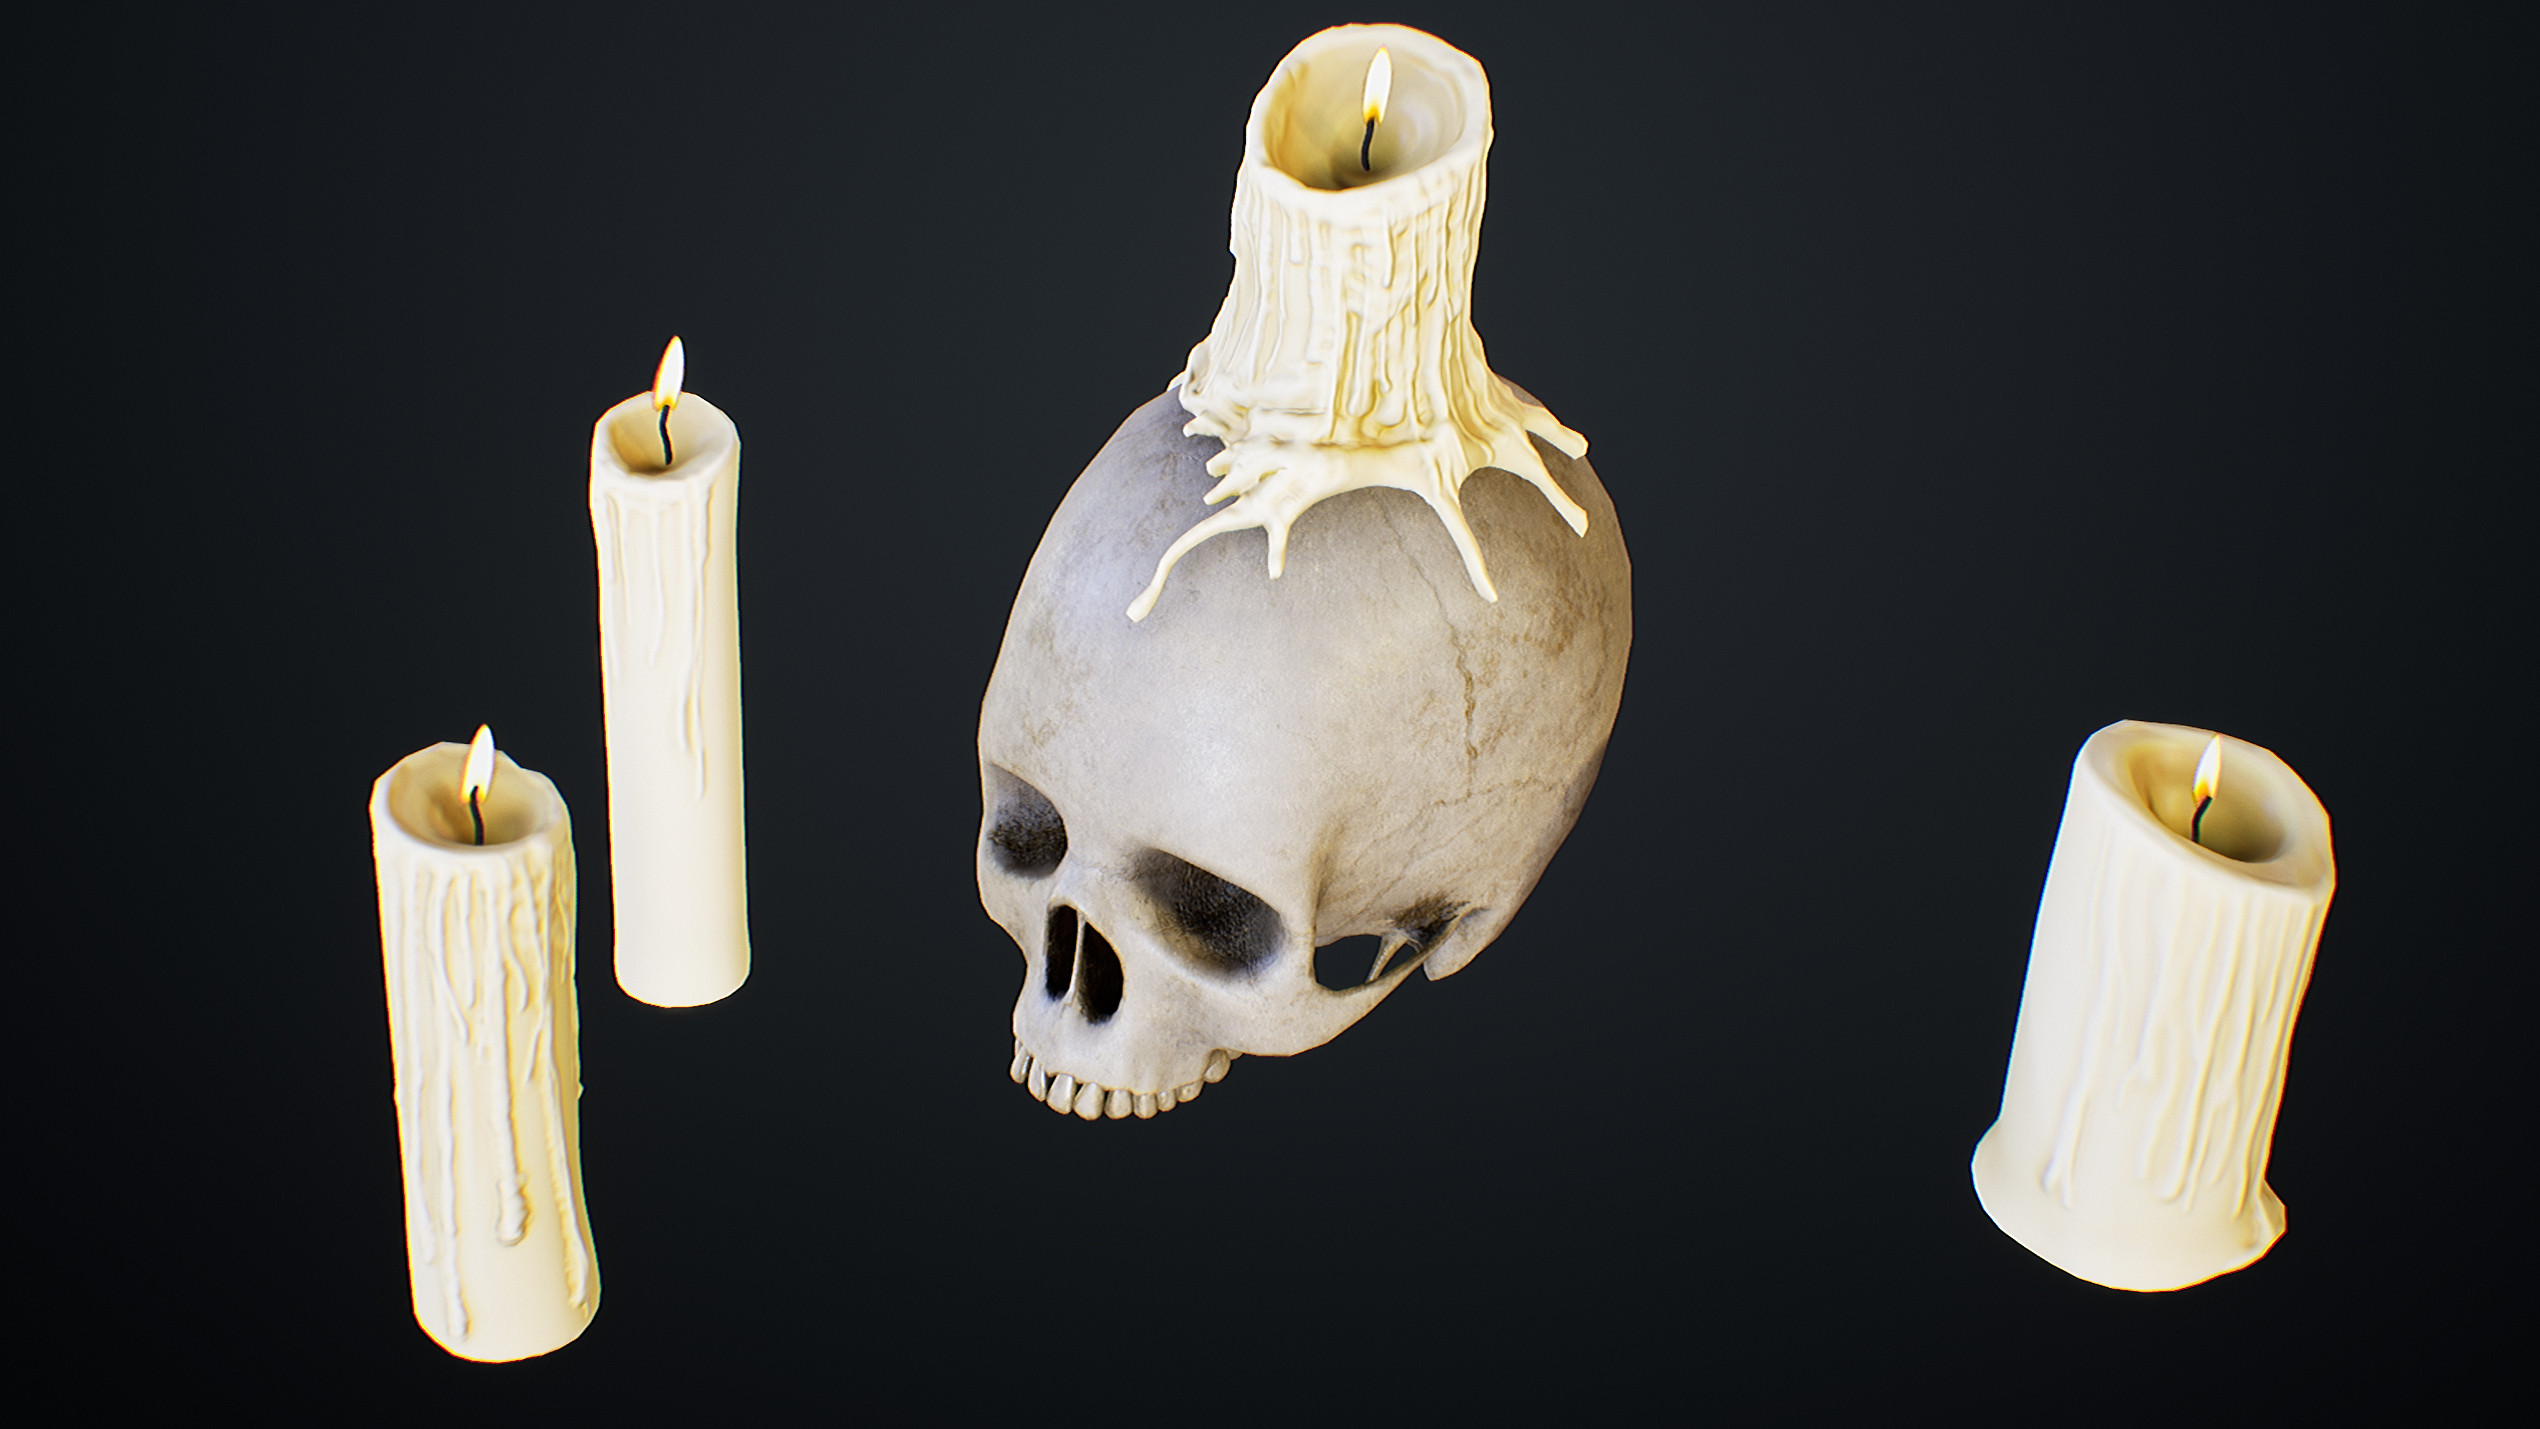 UE4 screenshot close up detailed shot of the scull and candles.